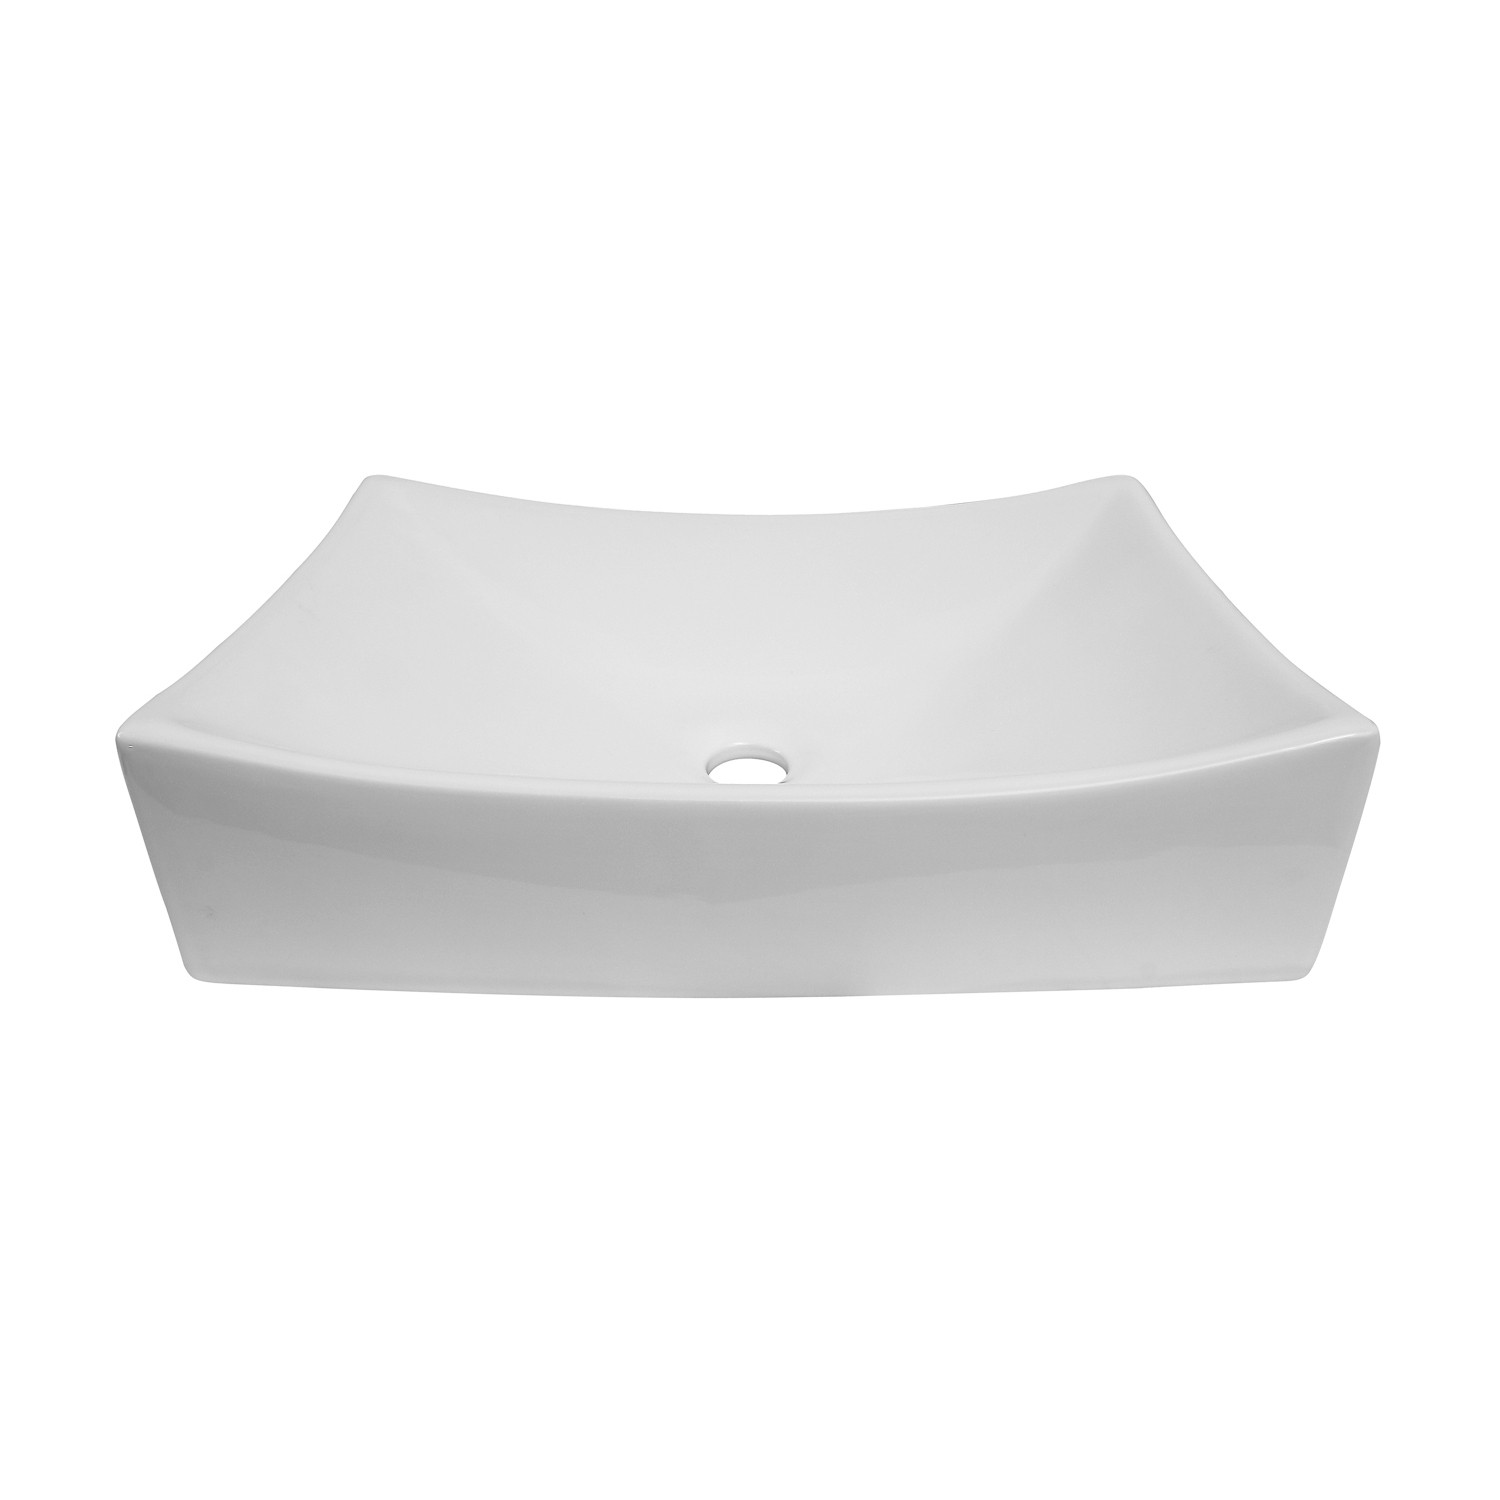 BARCLAY 4-490WH STYX 20 3/8 INCH SINGLE BASIN ABOVE COUNTER BATHROOM SINK - WHITE